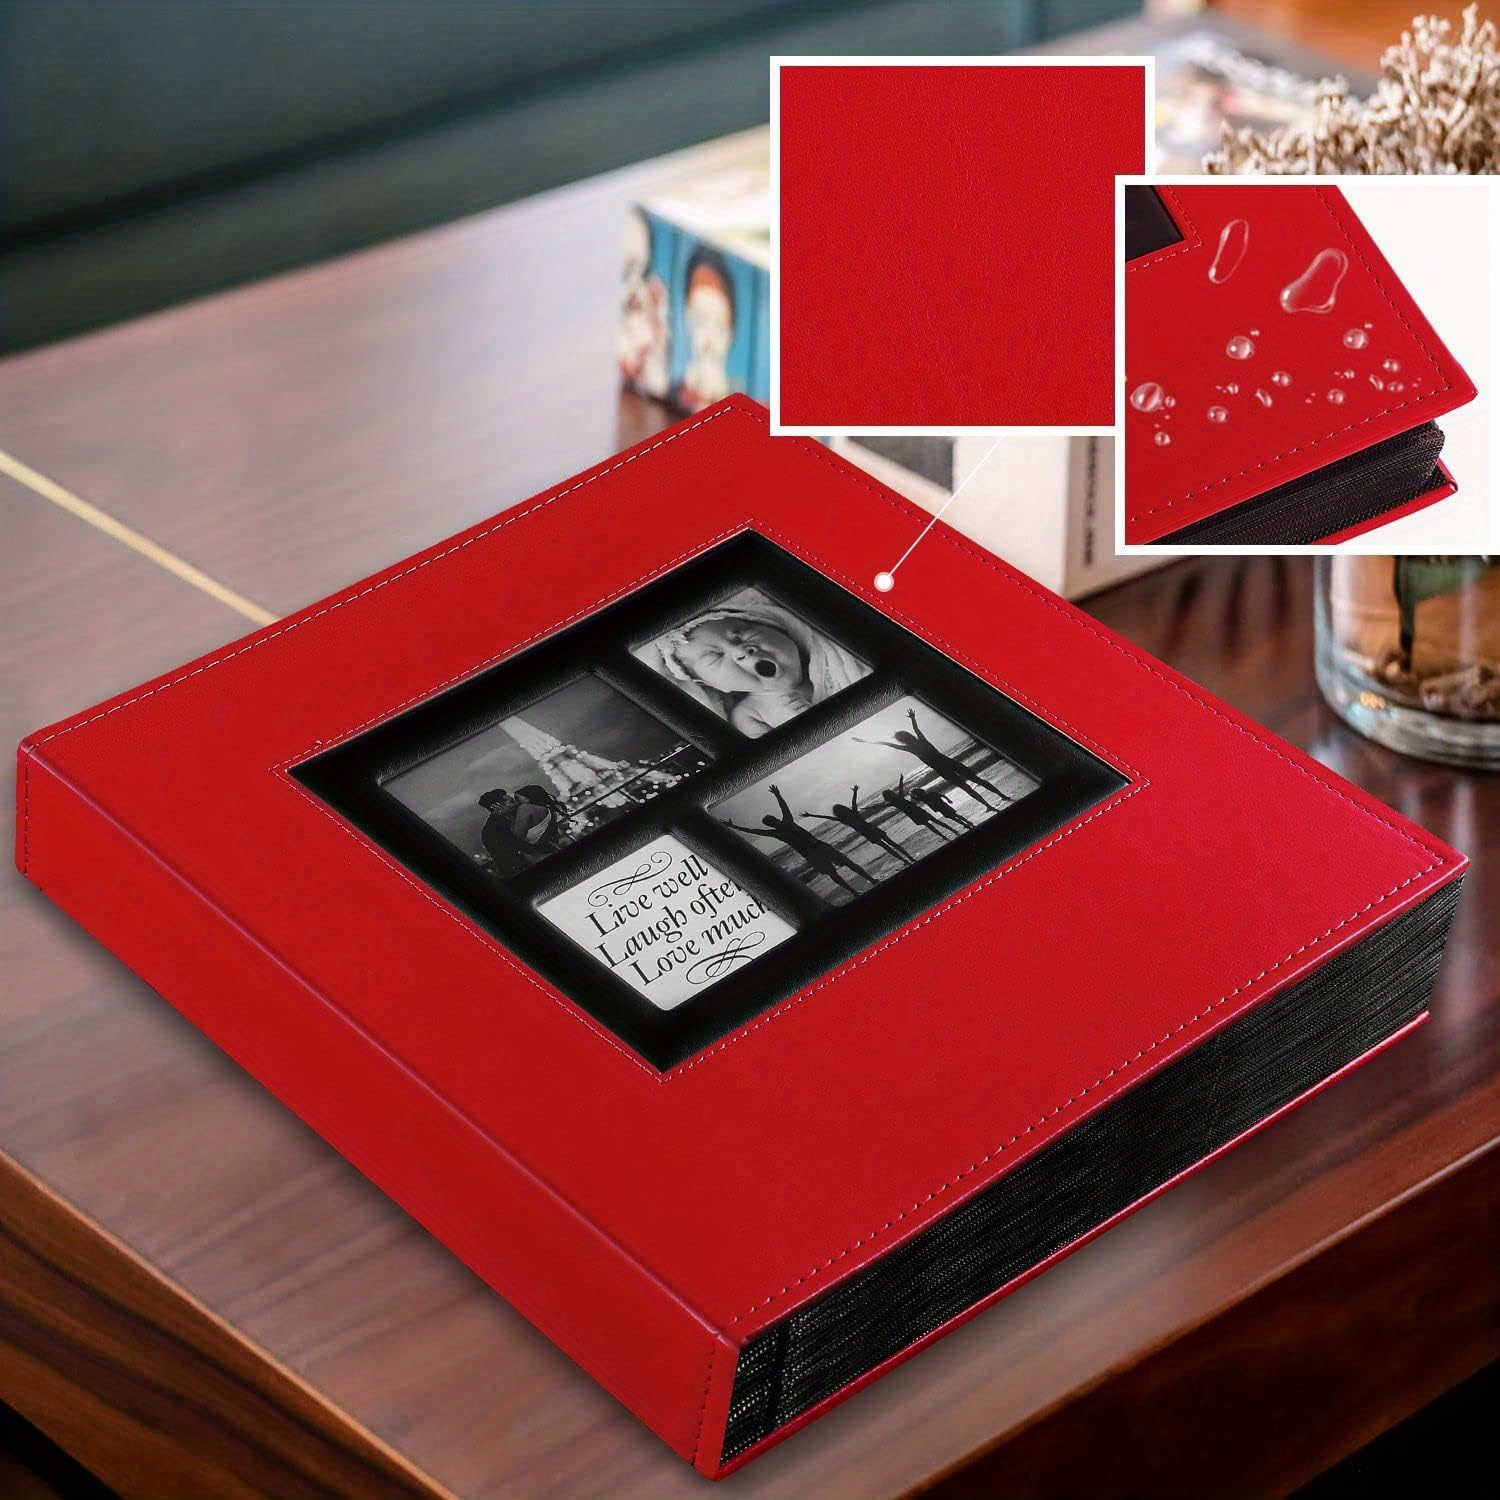 Photo Albums 4x6 Hold 600 Photos Black Pages Large Capacity Leather Cover  Wedding Family Photo Album Books Horizontal and Vertical Photos (White) 